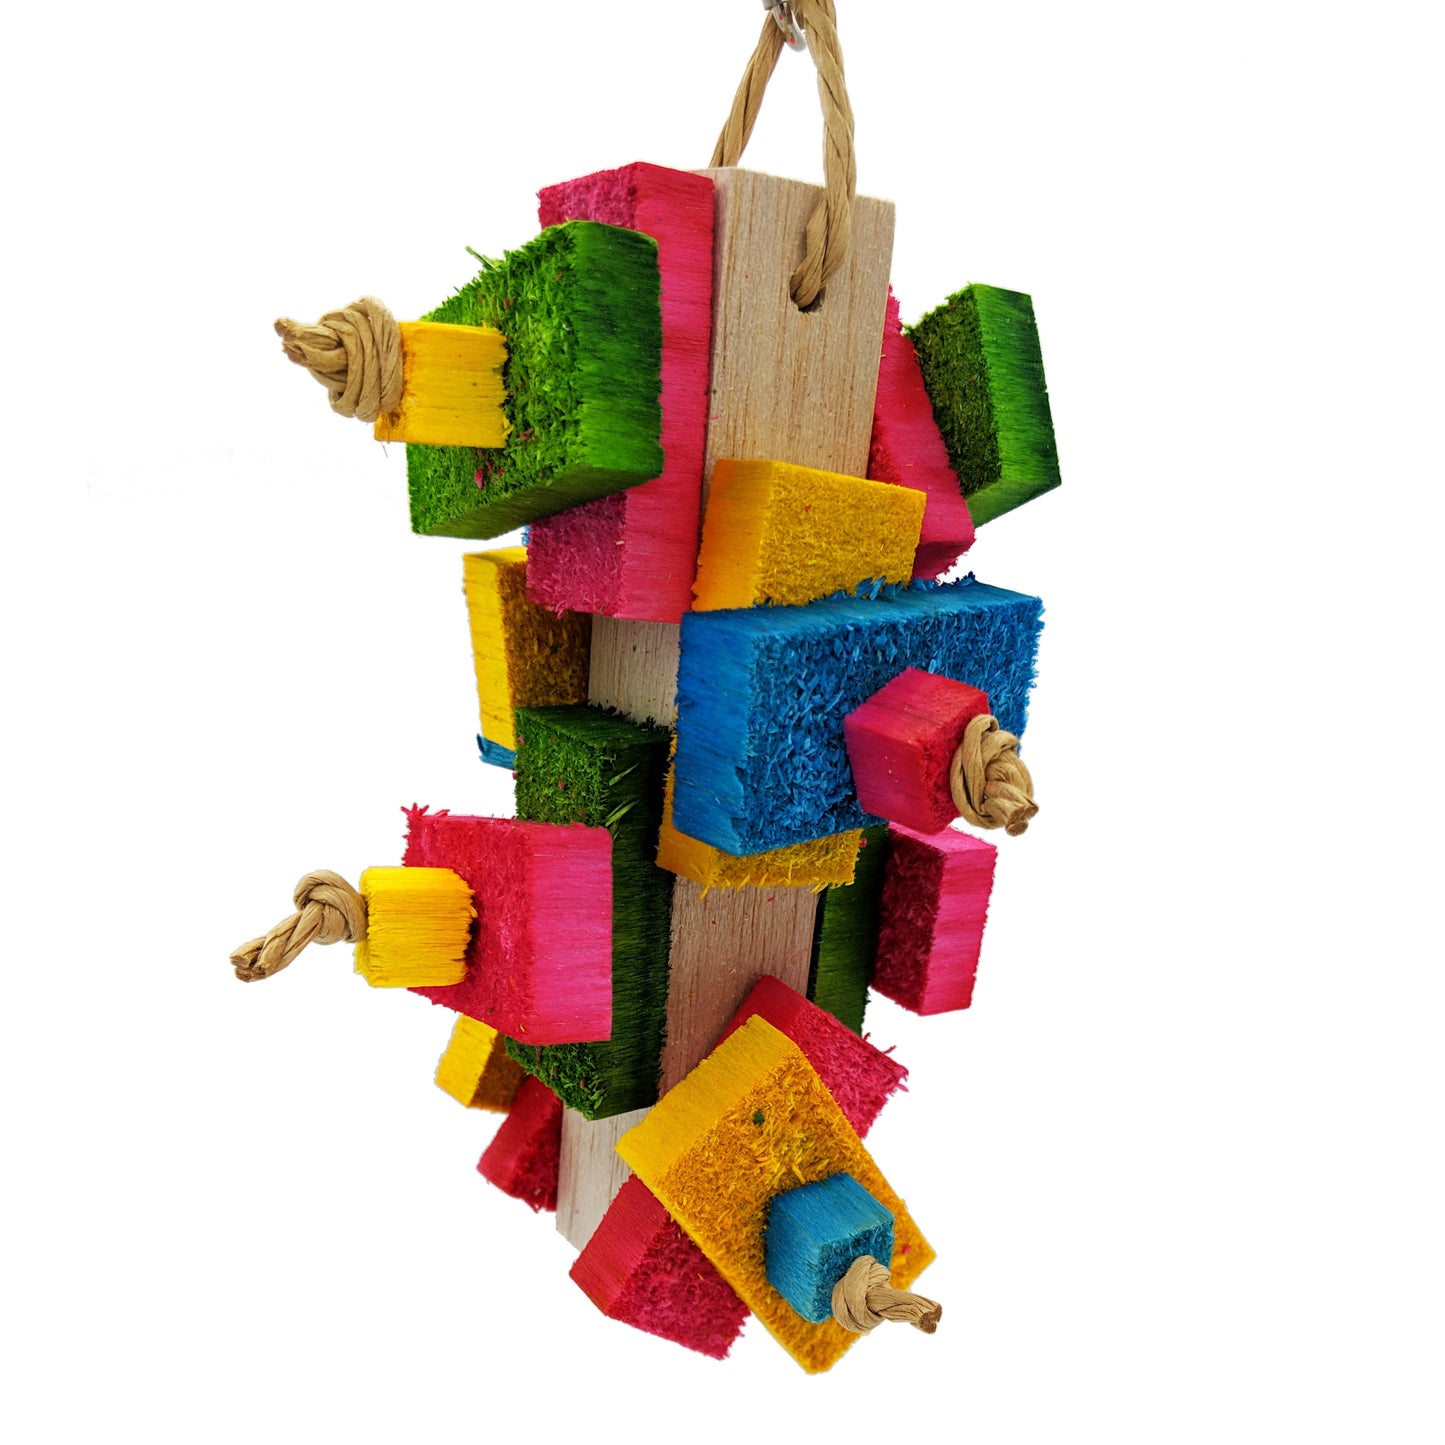 A balsa parrot toy. On a 1 inch by 6 inch base, has 16 half inch balsa slats and 8 half inch balsa cubes attached, 2 sets per side. strung with paper rope. 